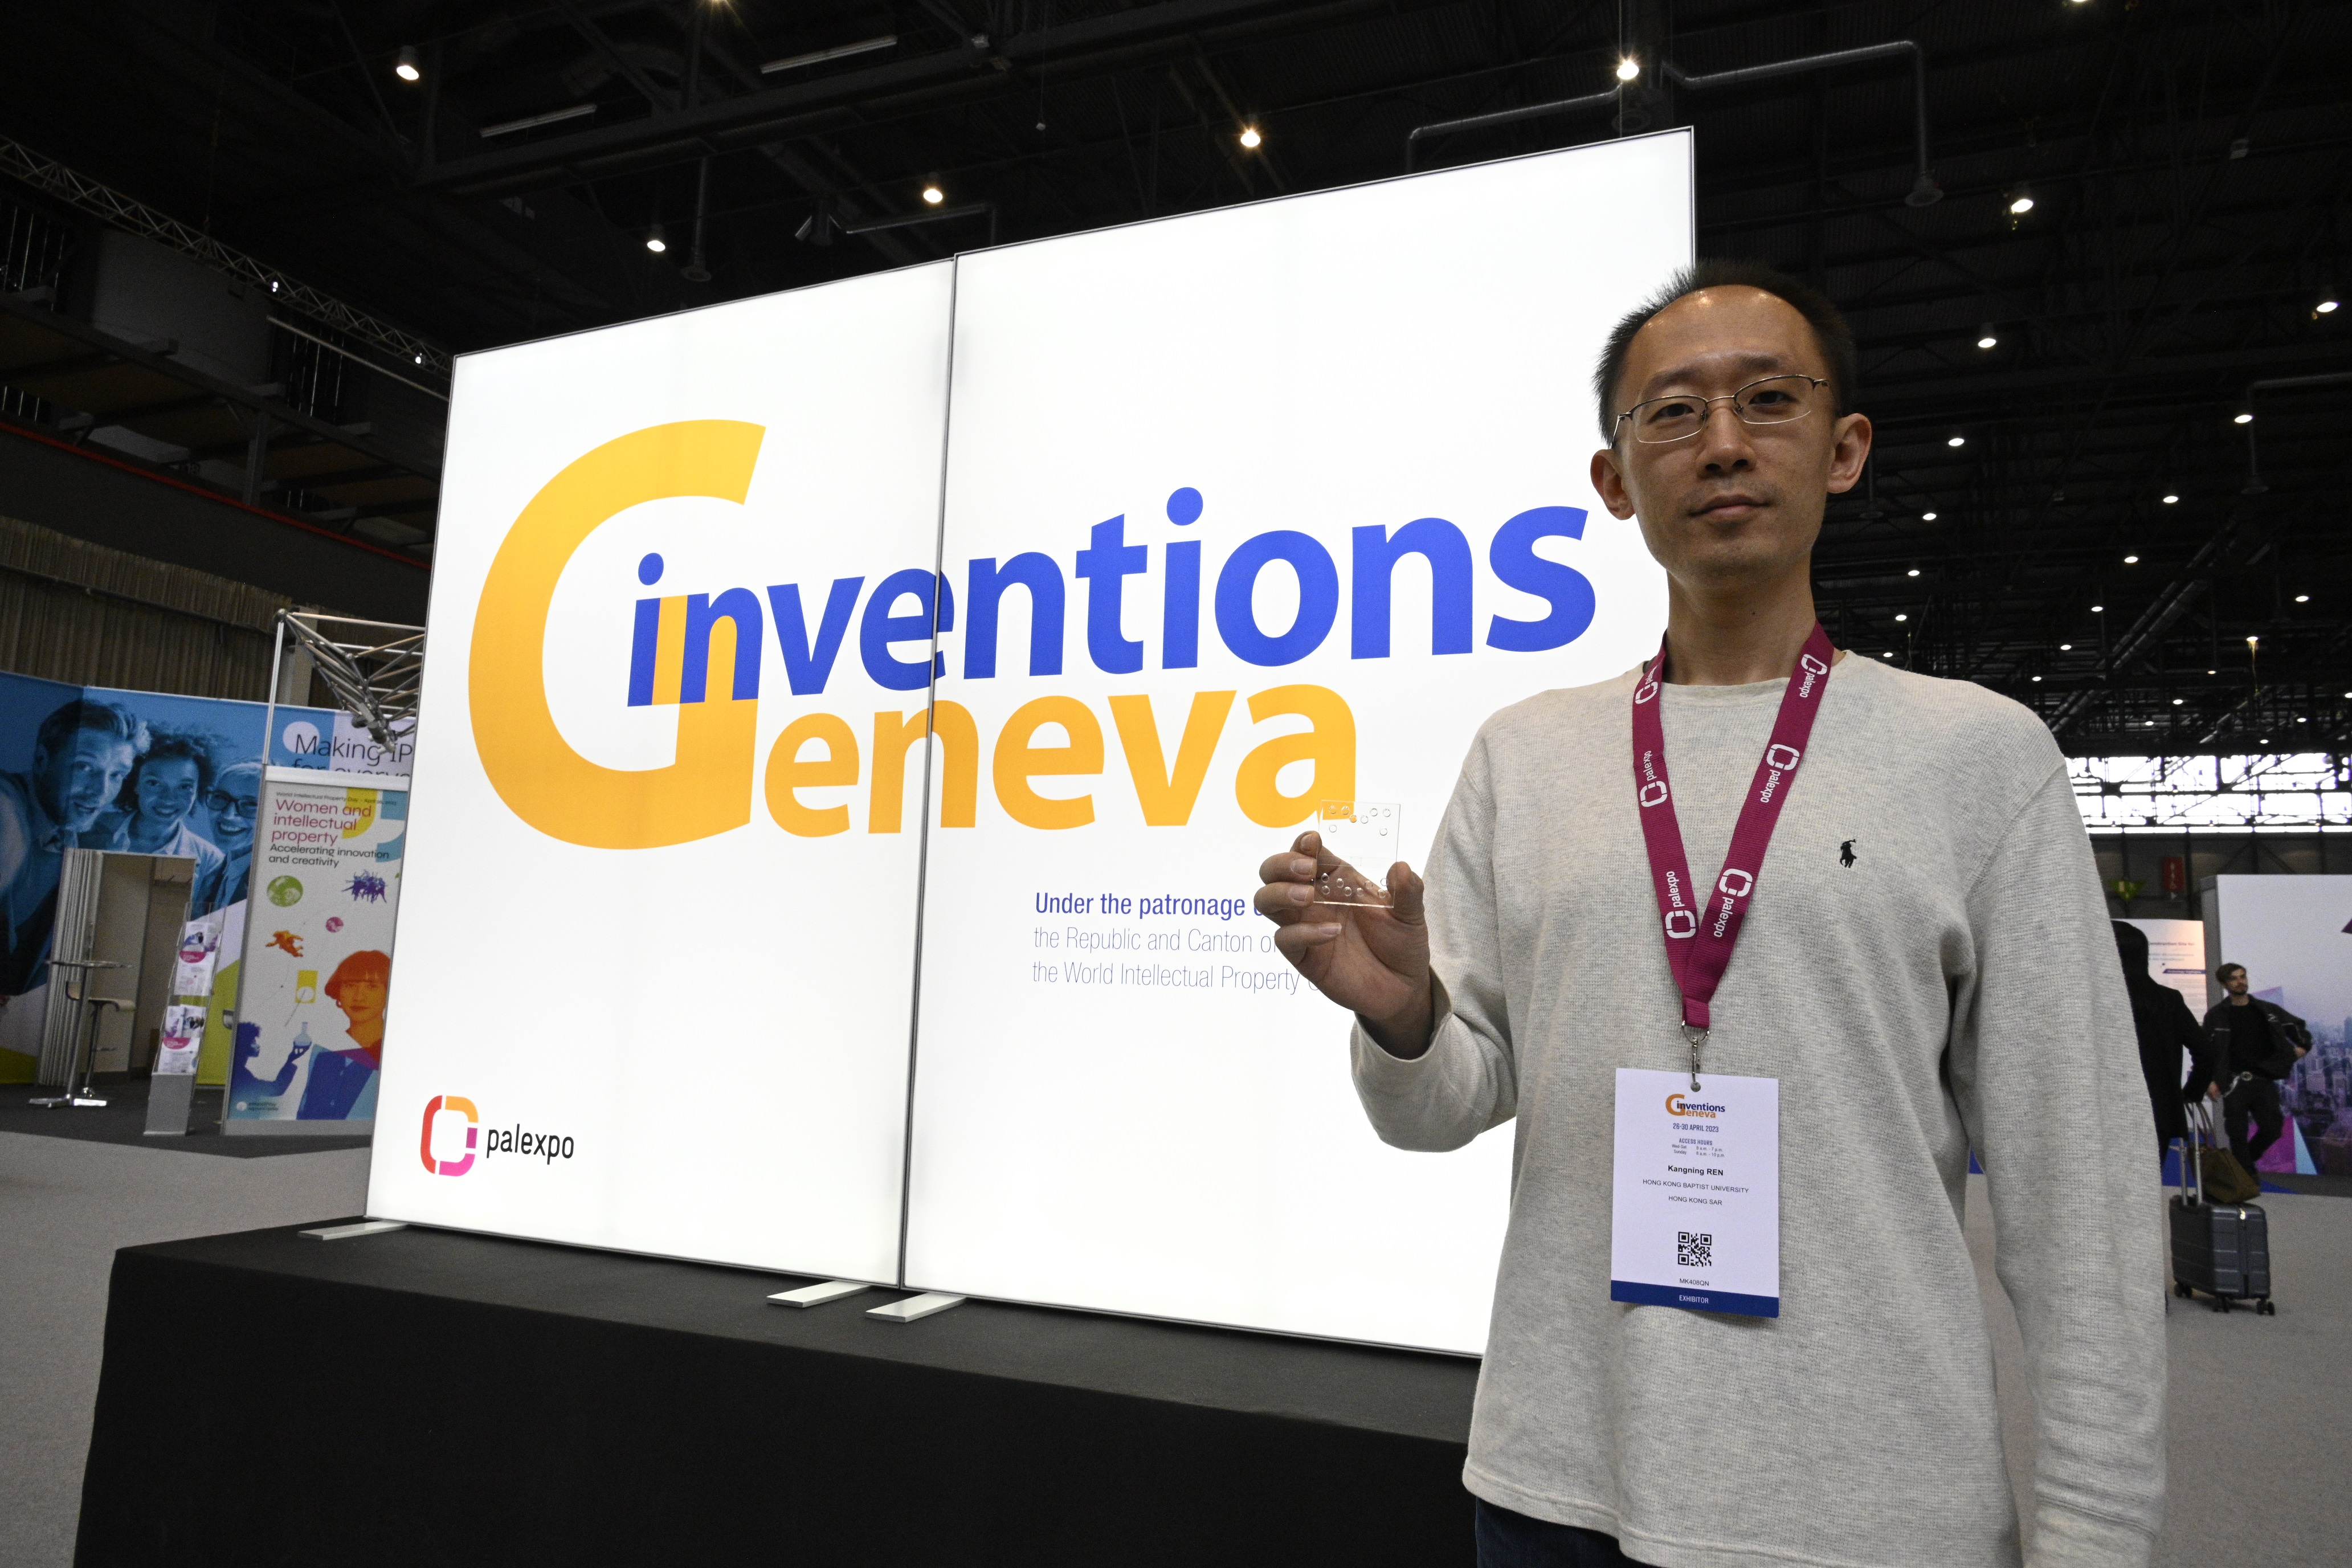 Dr Ren Kangning’s “A rapid and sample-to-answer AST microfluidic system applicable in resource-limited conditions” project won a Gold Medal at the Geneva International Exhibition of Inventions.